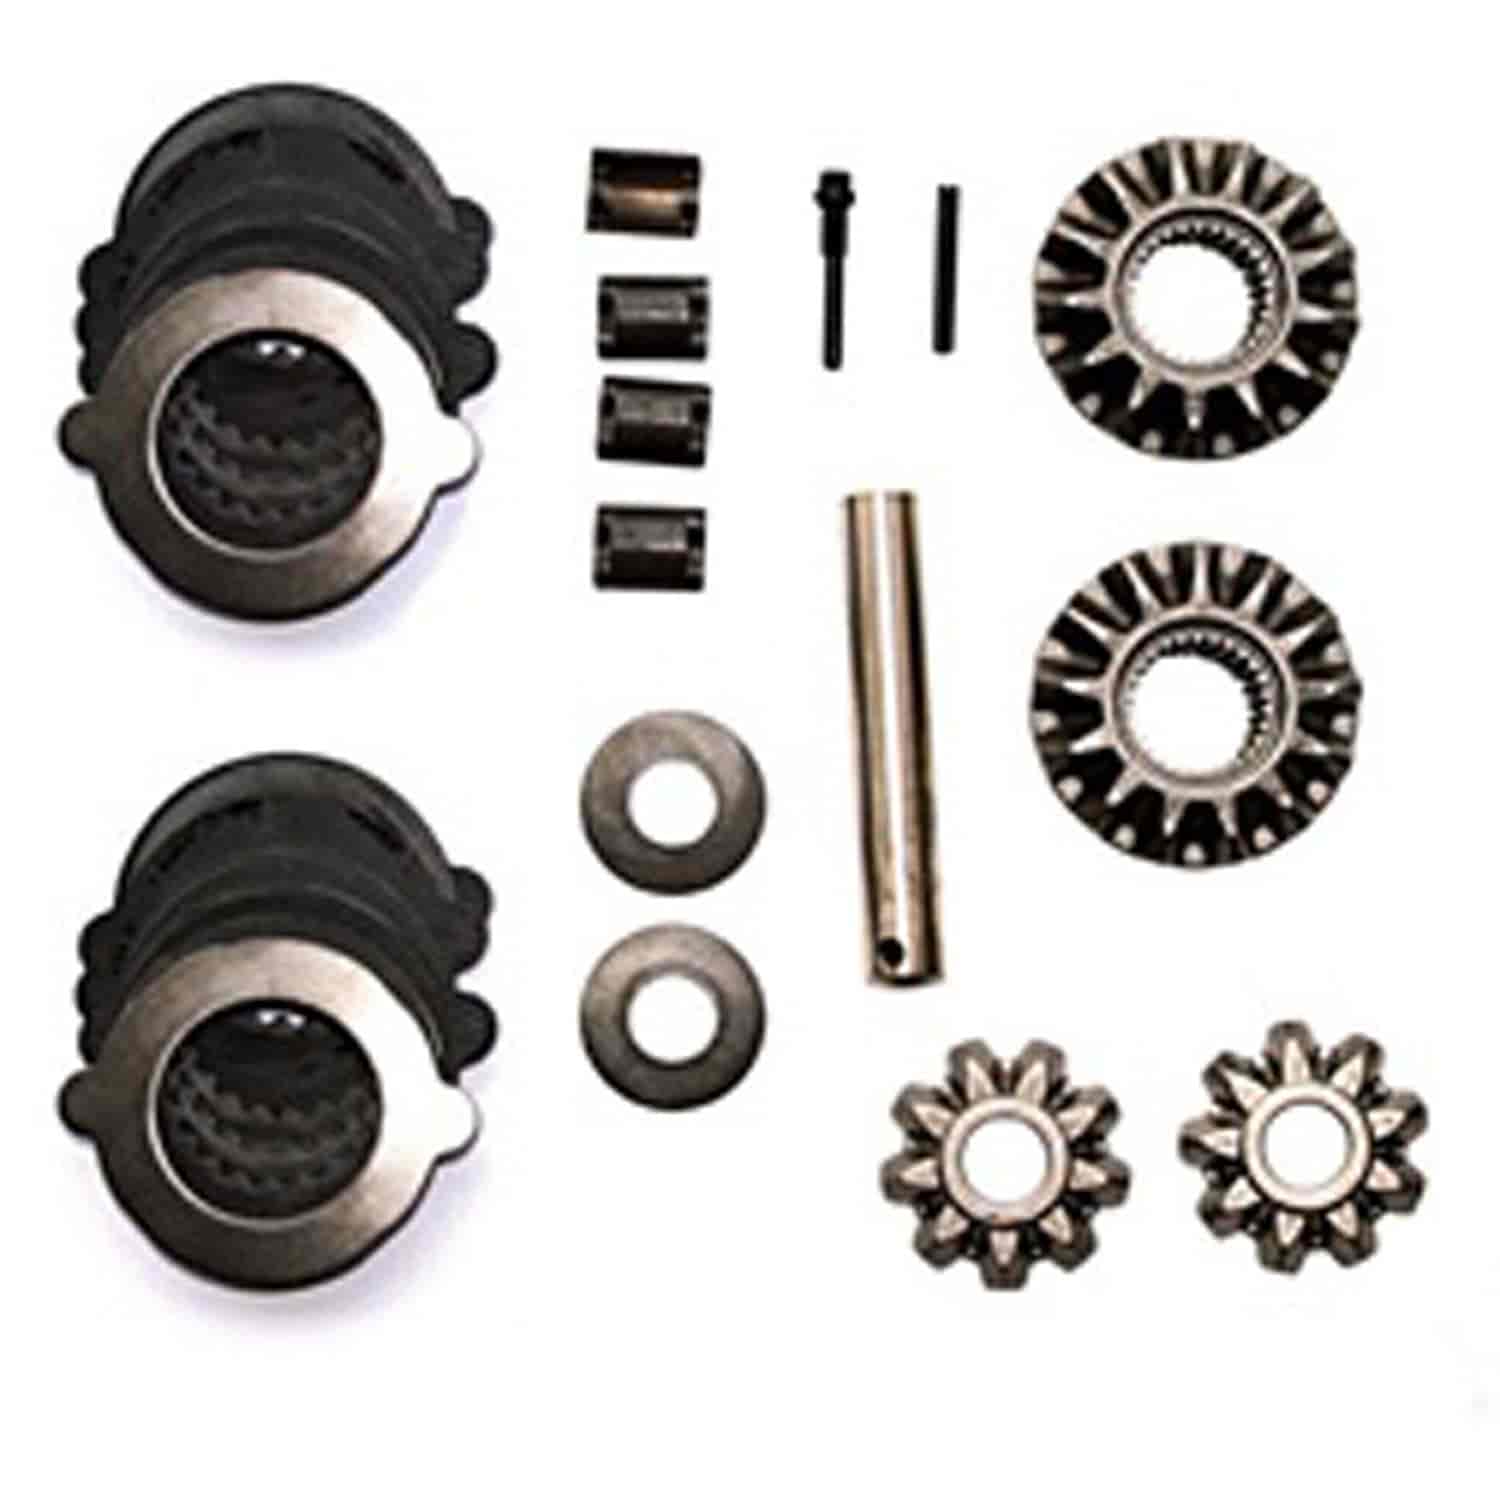 Differential Case Inner Parts Kit 97-02 TJ XJ with Dana 35 rear with Trac-Loc